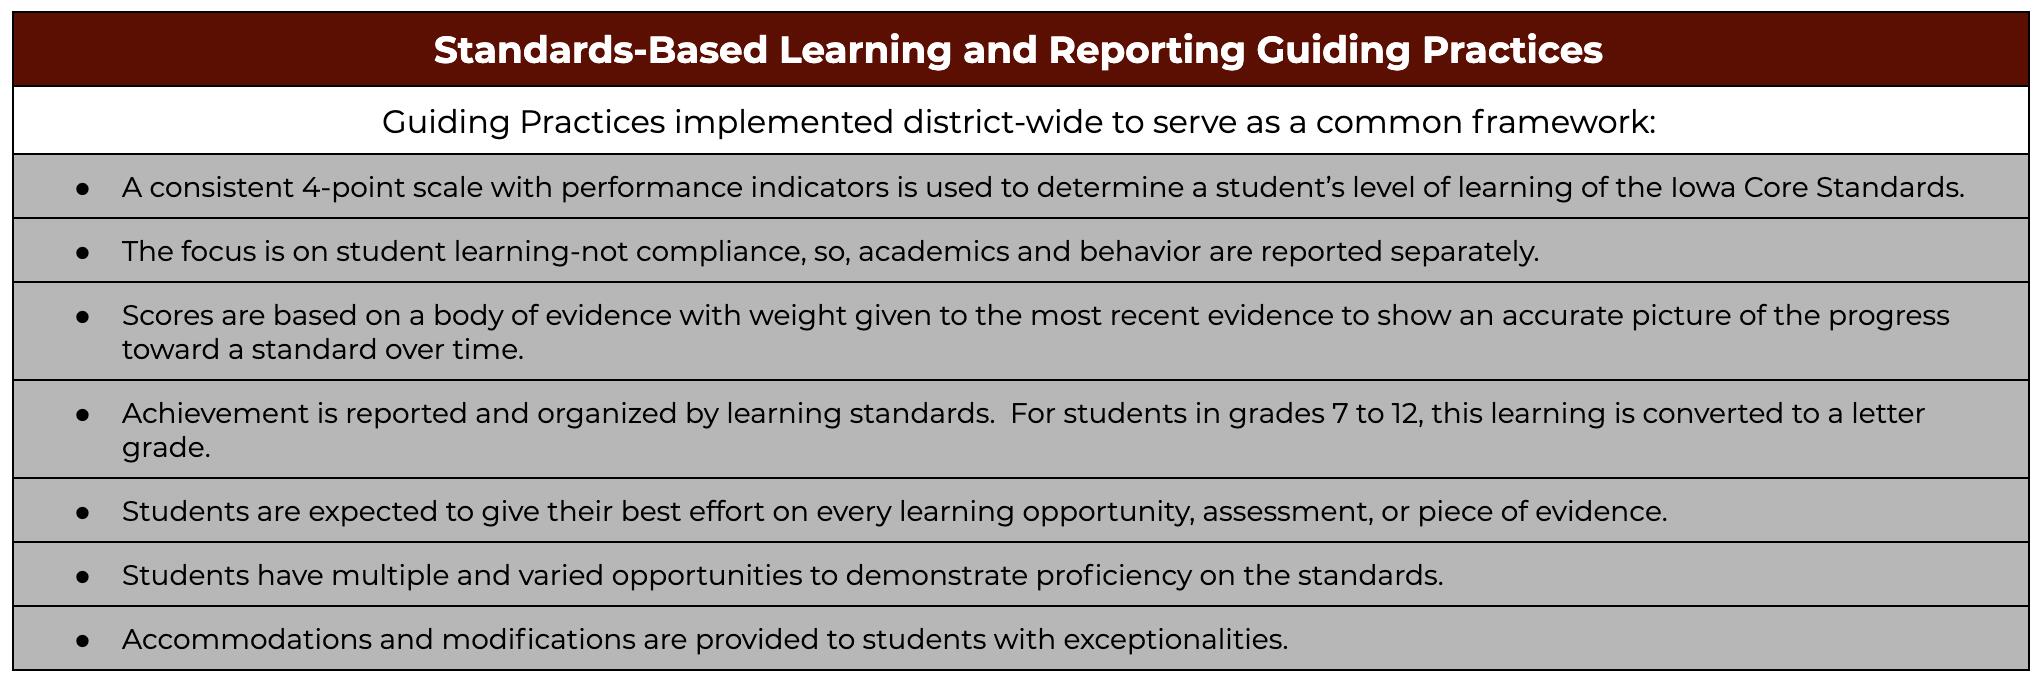 OCSD Standards-Based Learning Guiding Practices